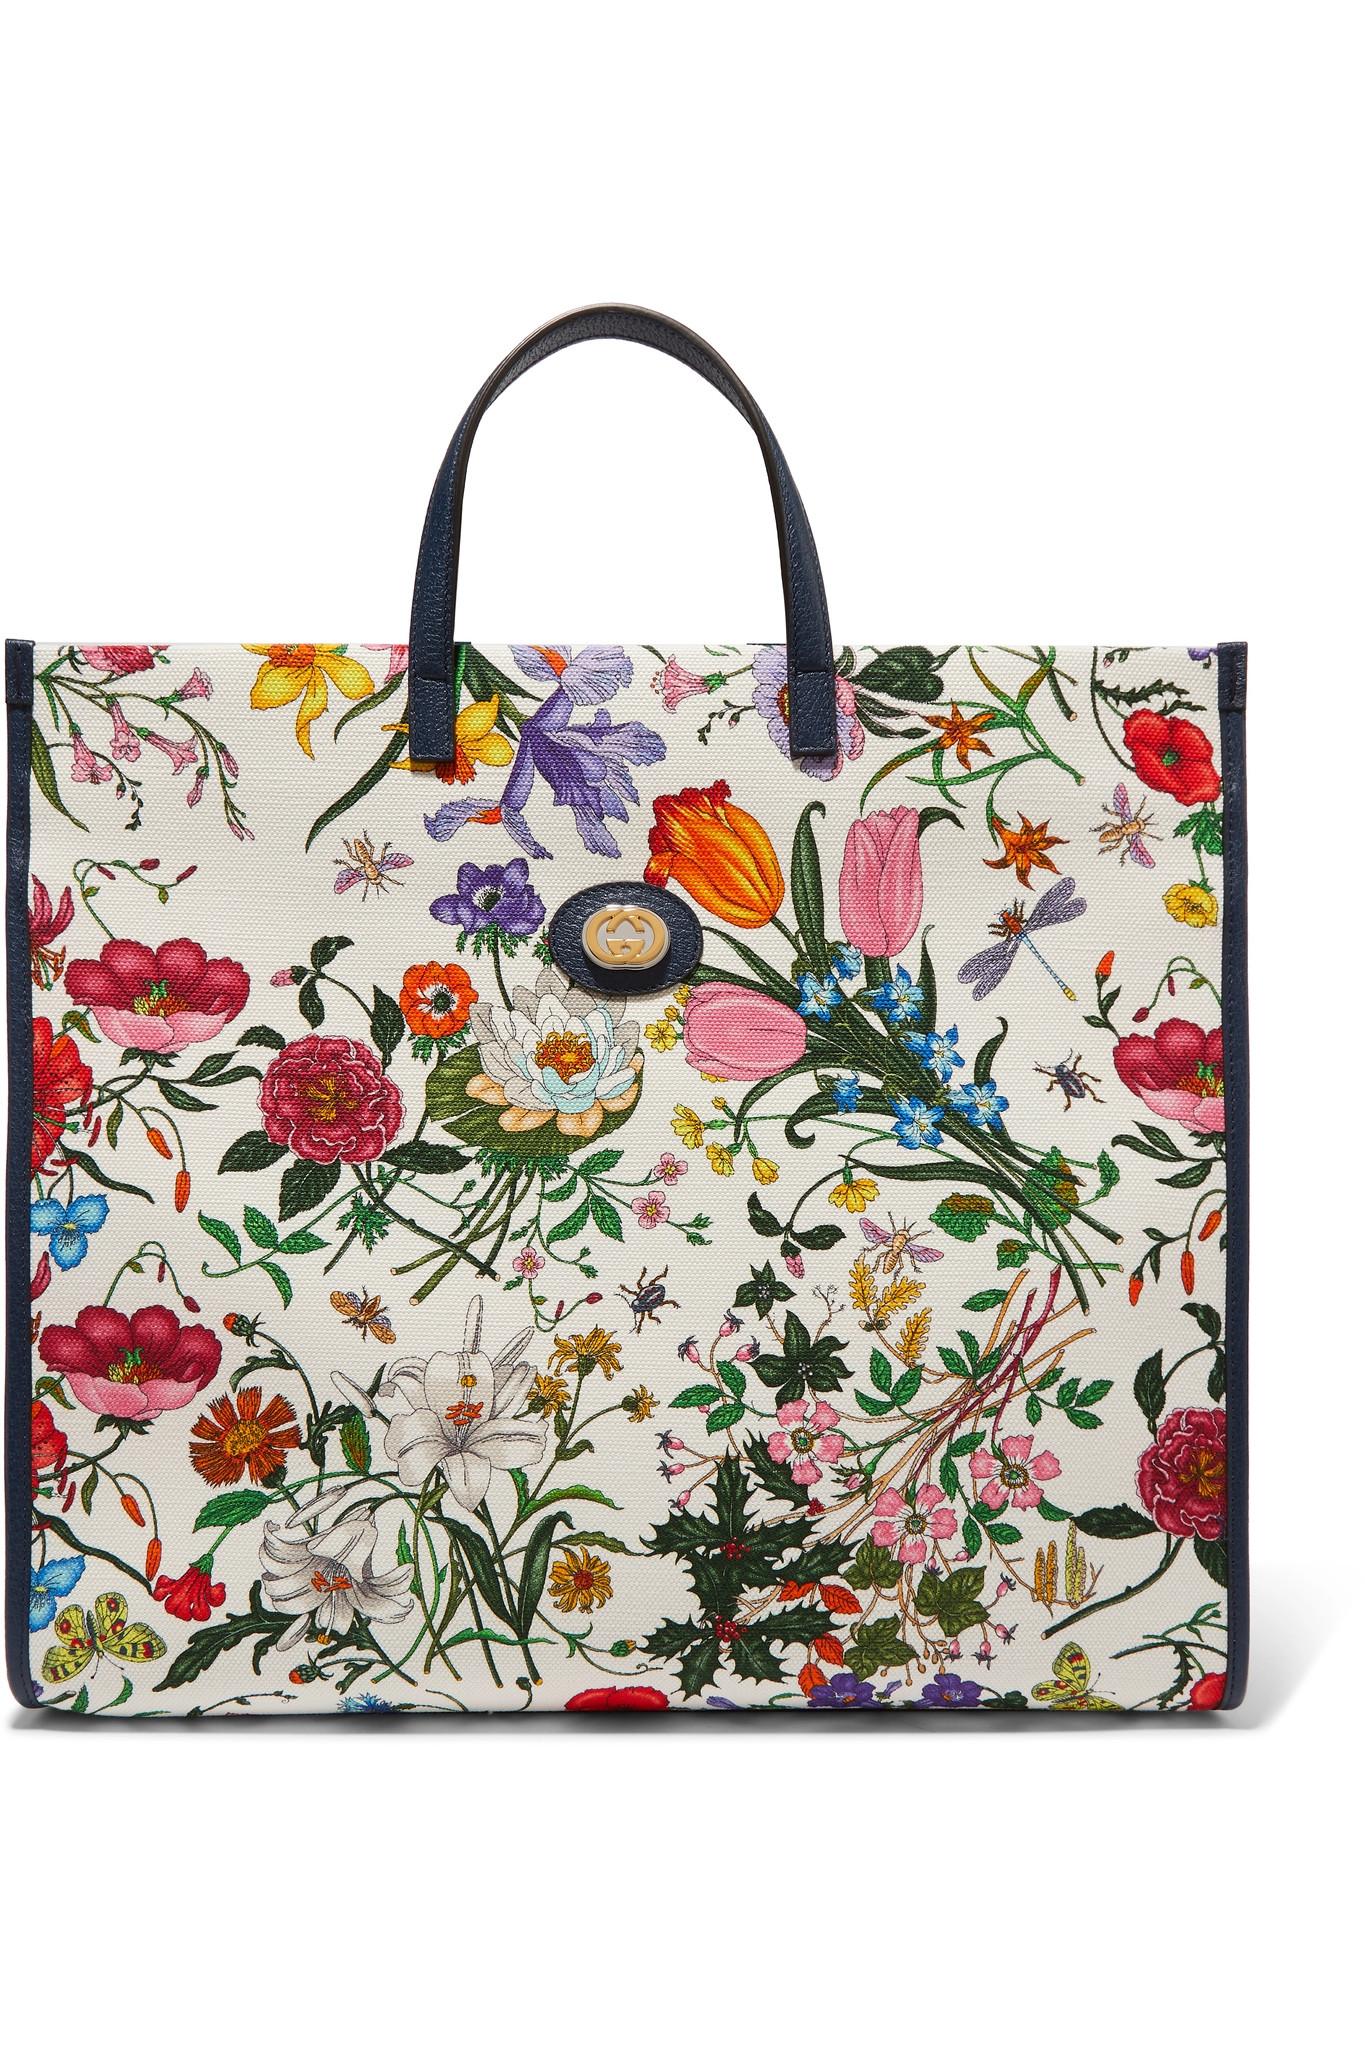 Gucci Beauty Vip Gift Ivory White Green Cotton Tote Bag Floral Print - Gucci  bag 